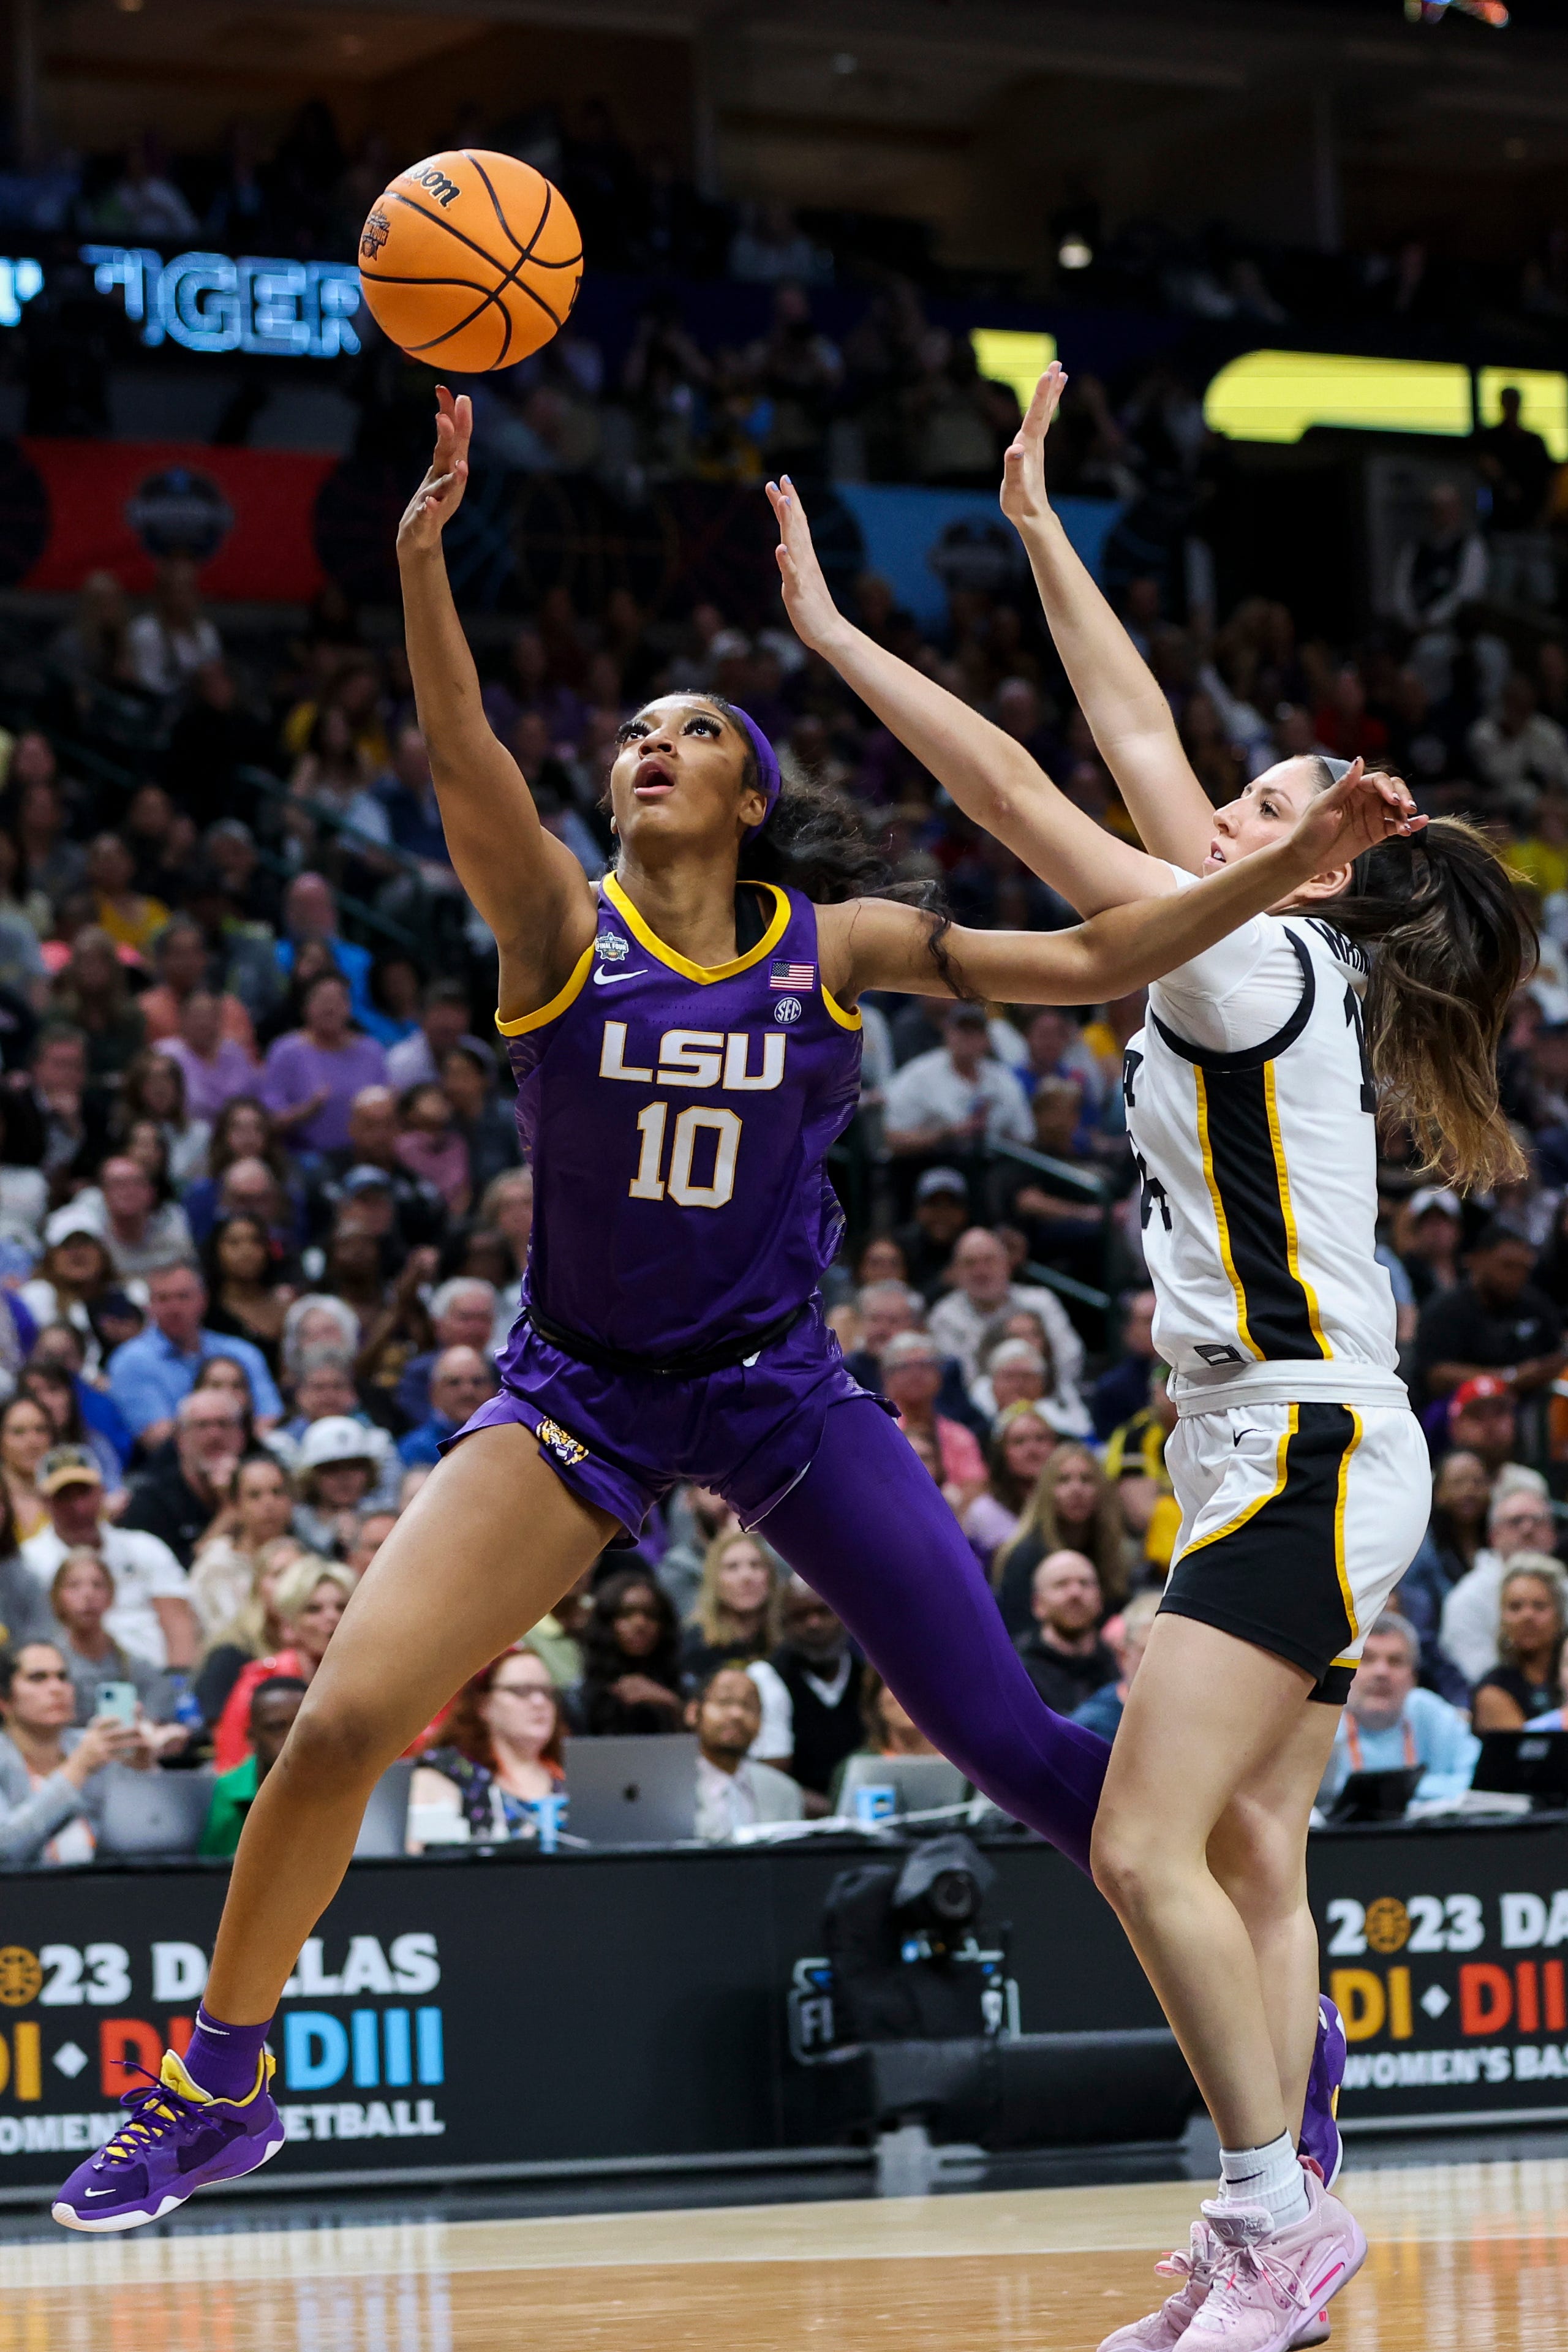 Apr 2, 2023; Dallas, TX, USA; LSU Lady Tigers forward Angel Reese (10) drives to the basket against Iowa Hawkeyes forward McKenna Warnock (14) in the first half during the final round of the Women's Final Four NCAA tournament at the American Airlines Center. Mandatory Credit: Kevin Jairaj-USA TODAY Sports